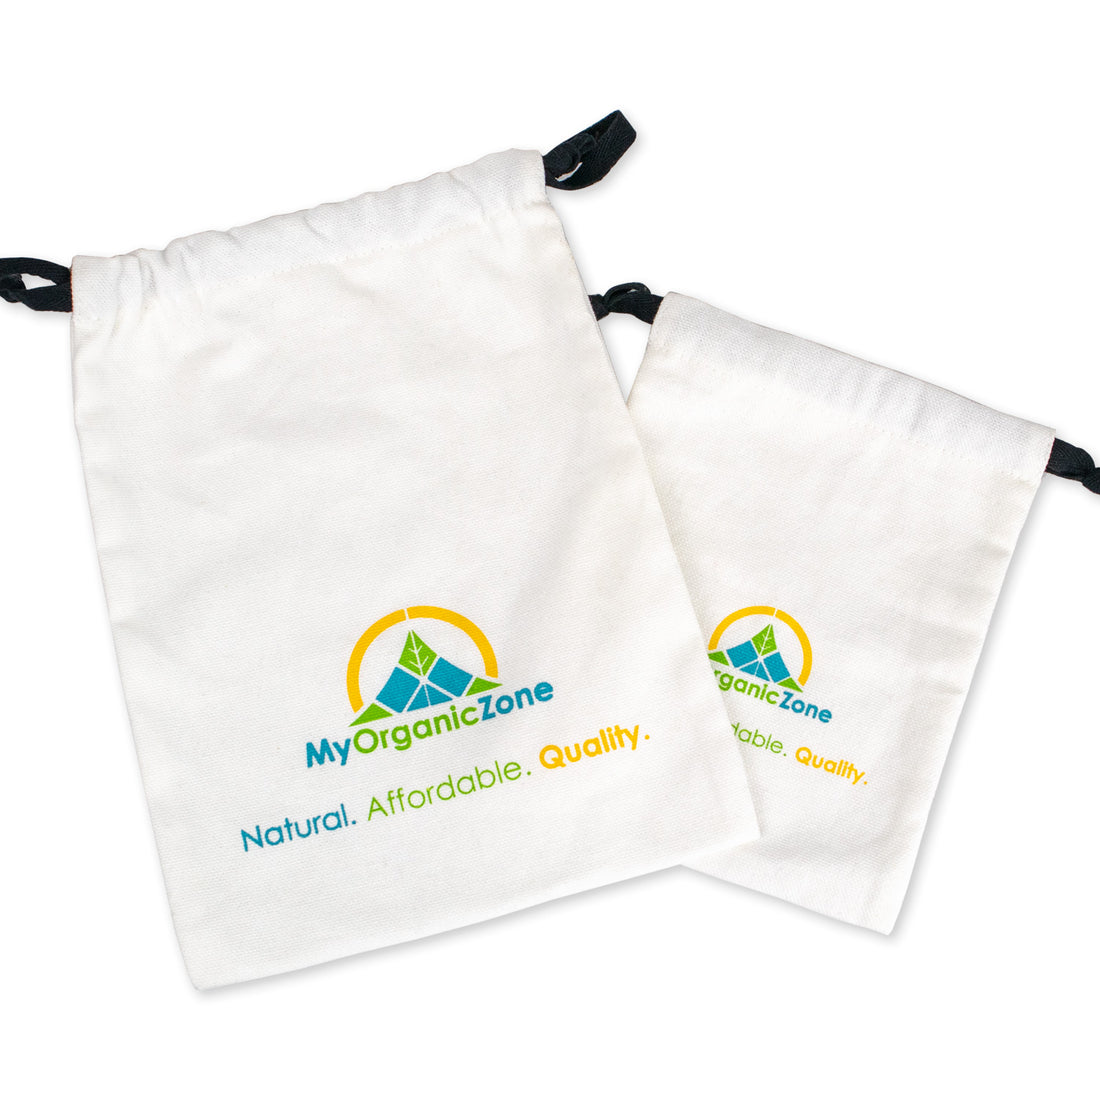 MOZ’s Recycled Packaging Initiative: Introducing Our Eco-Friendly Baggies